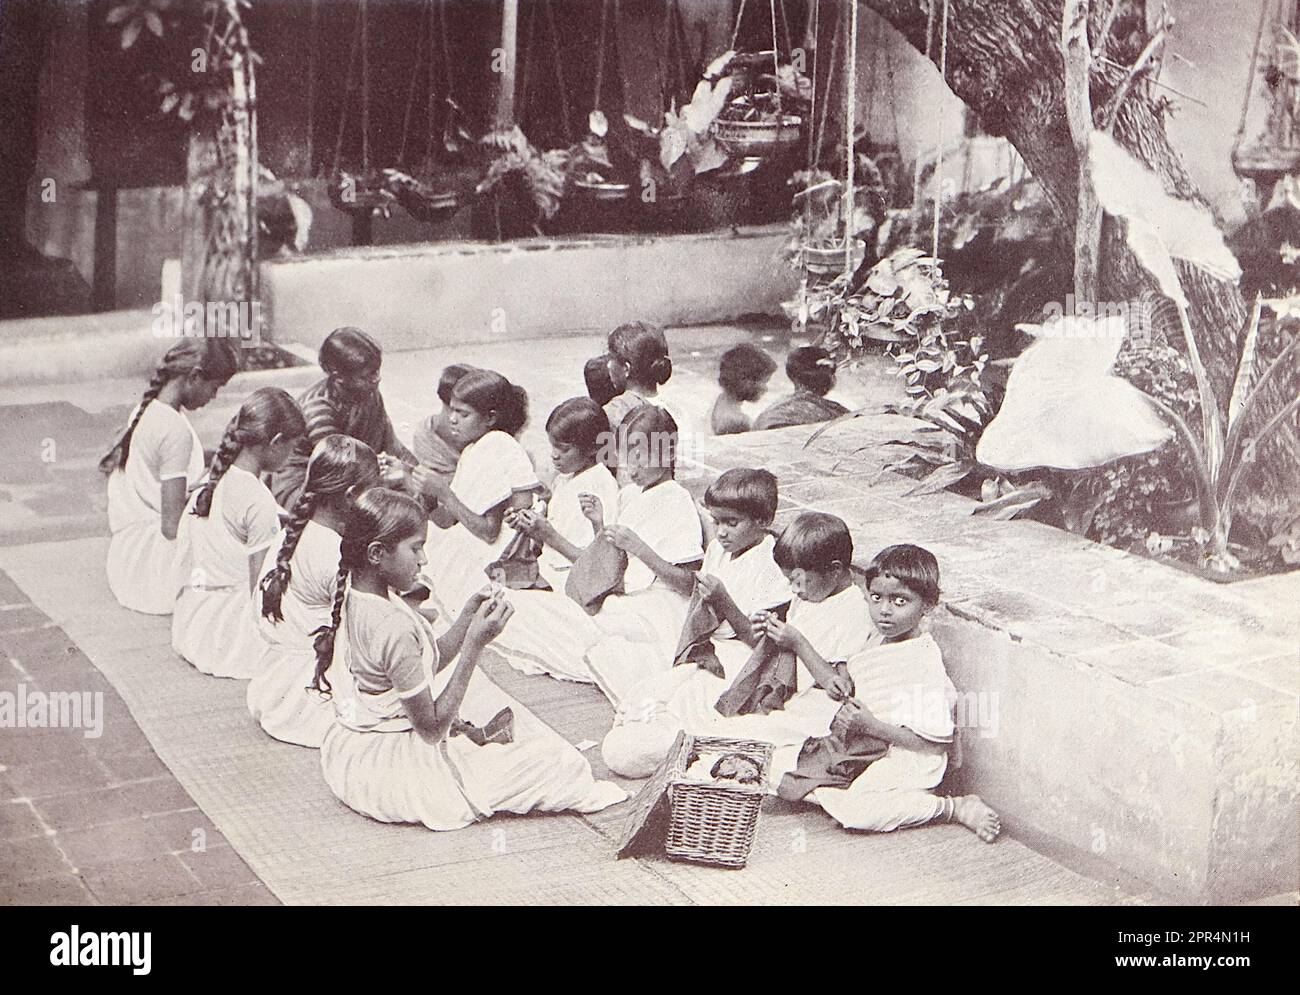 A sewing class in the courtyard at the Dohnavur compound. Half-tone engraving from a photograph by Mr. Penn of Ootacamund (now known as Ooto), in the Tamil Nadu region of Southern India, c1912. The image relates to the Church of England Zenana Mission’s nursery and compound in Dohnavur, also in Tamil Nadu and about thirty miles from the southern tip of India. The compound was run by Amy Wilson-Carmichael and sought to promote Christianity among babies and children (at the time only girls, many who were victims of temple prostitution). Stock Photo